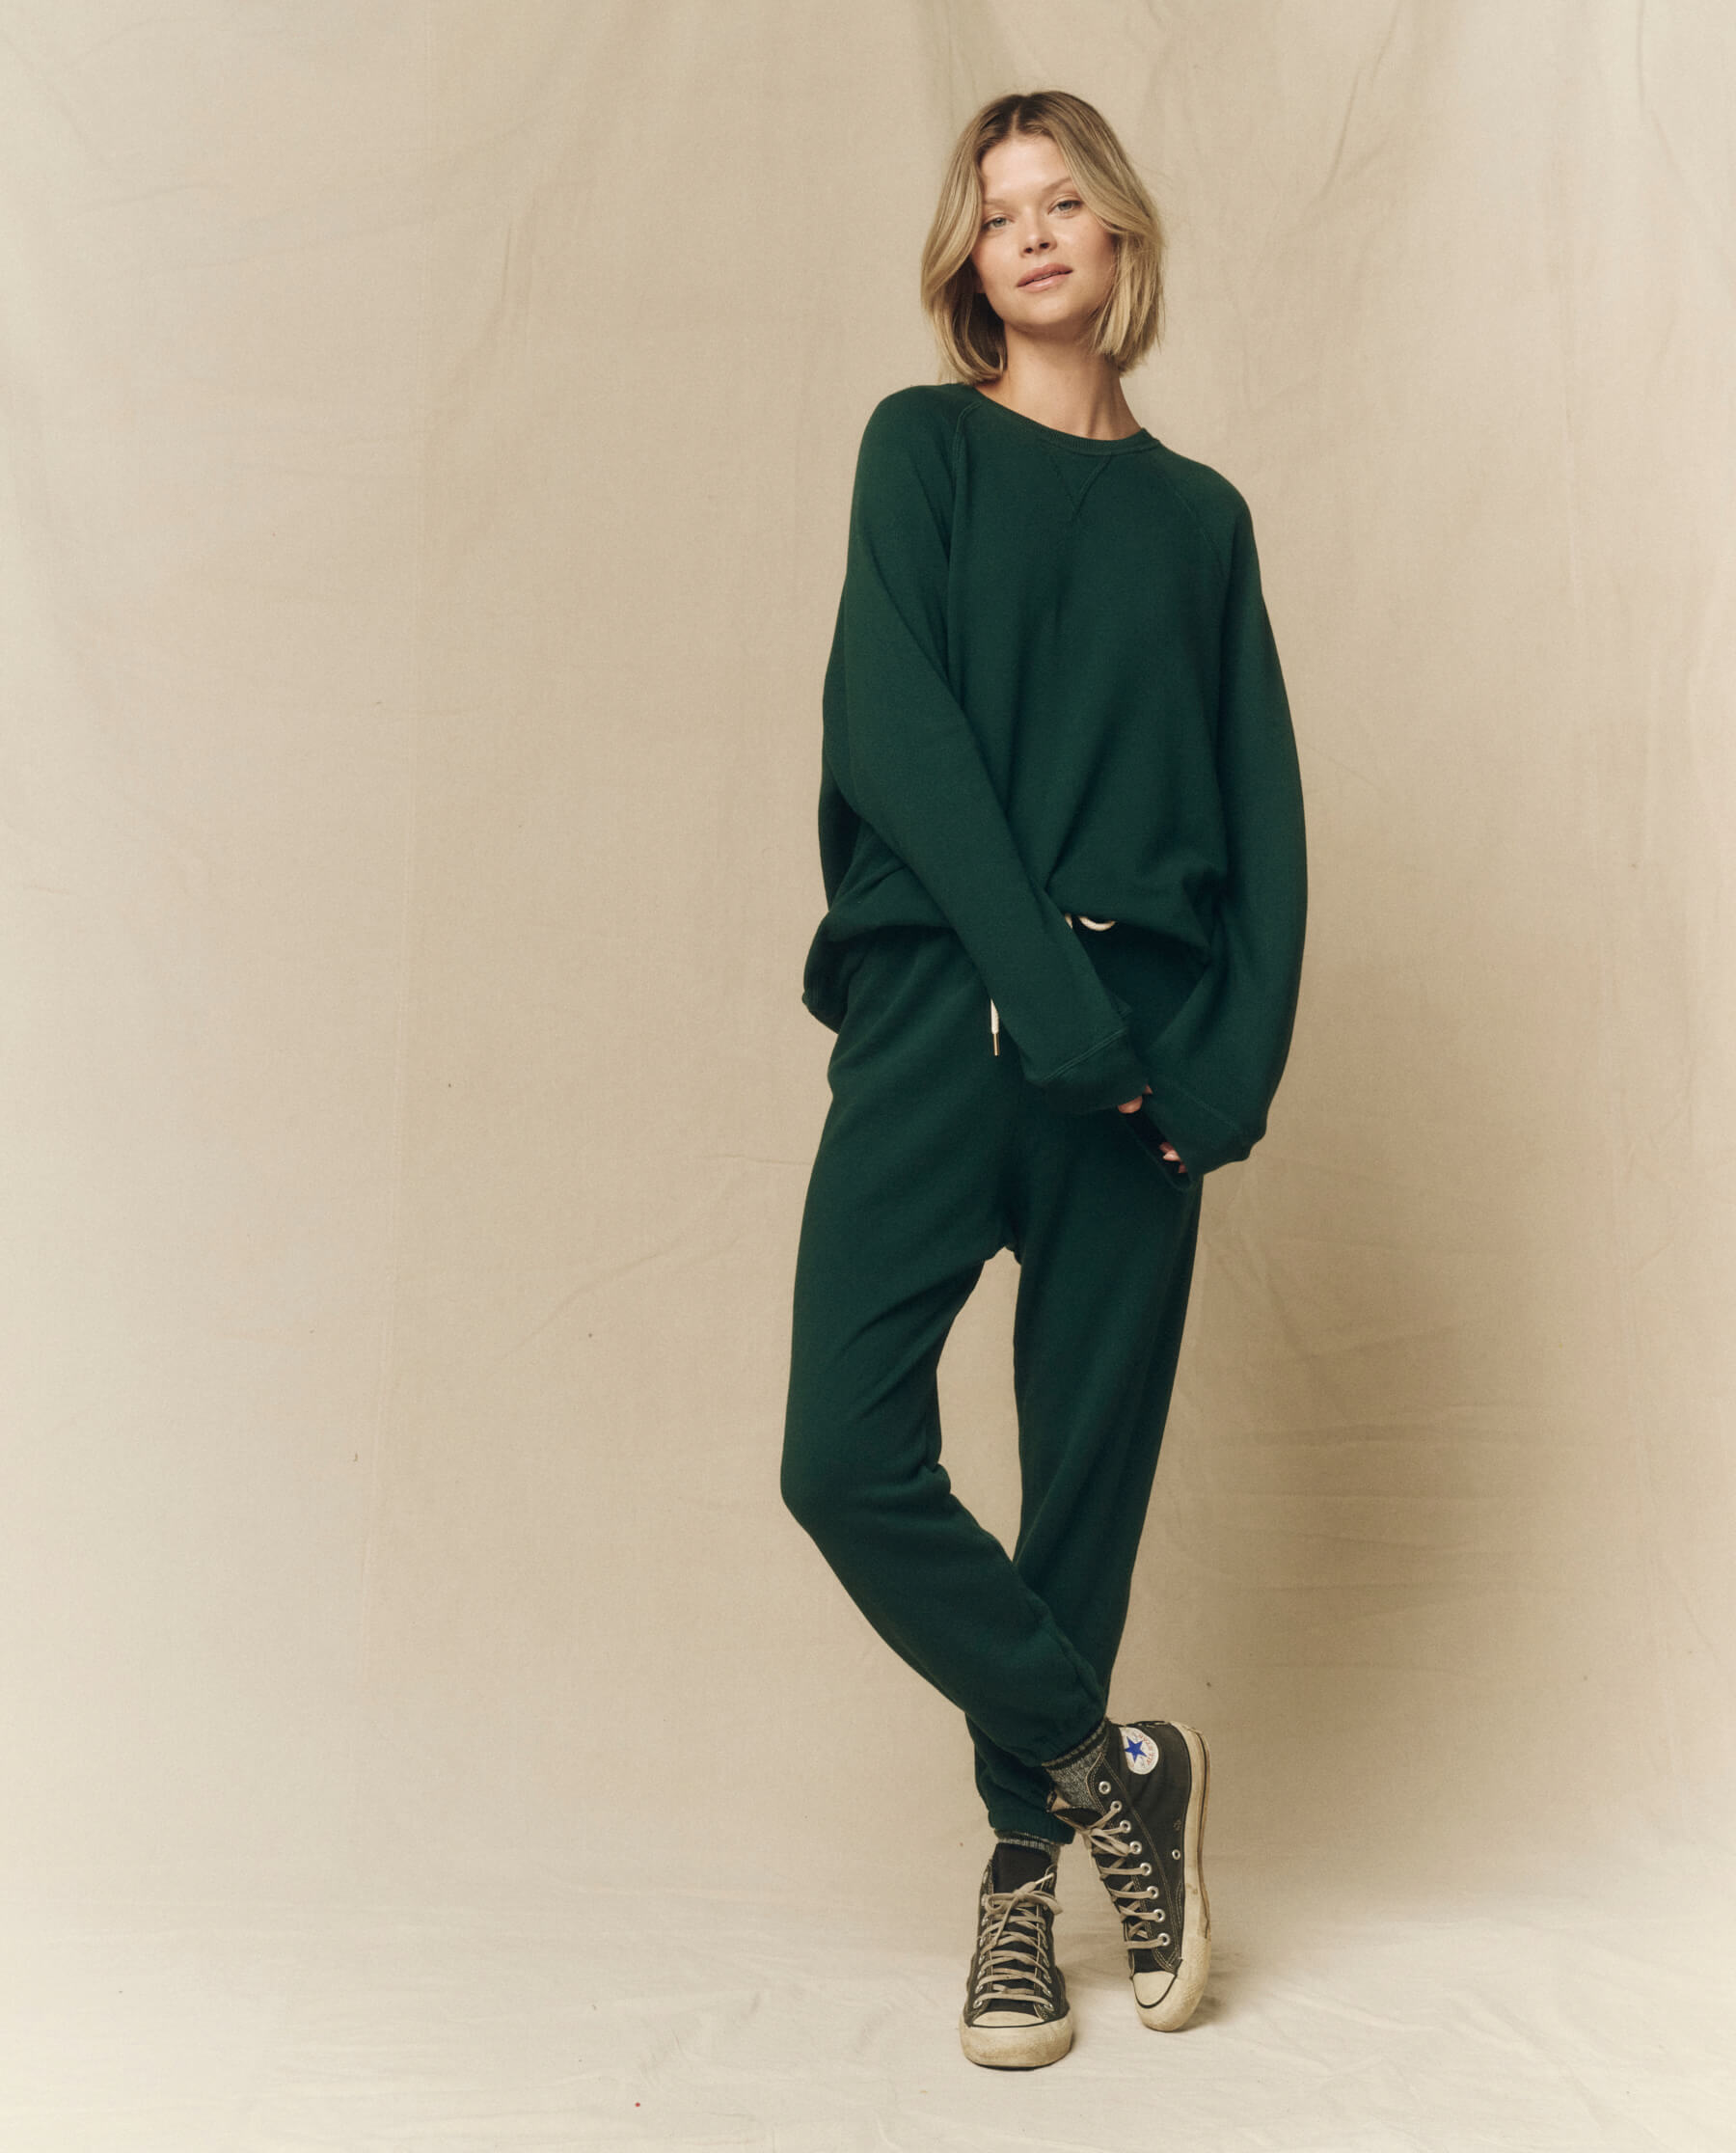 The Slouch Sweatshirt. Solid -- Green Grove